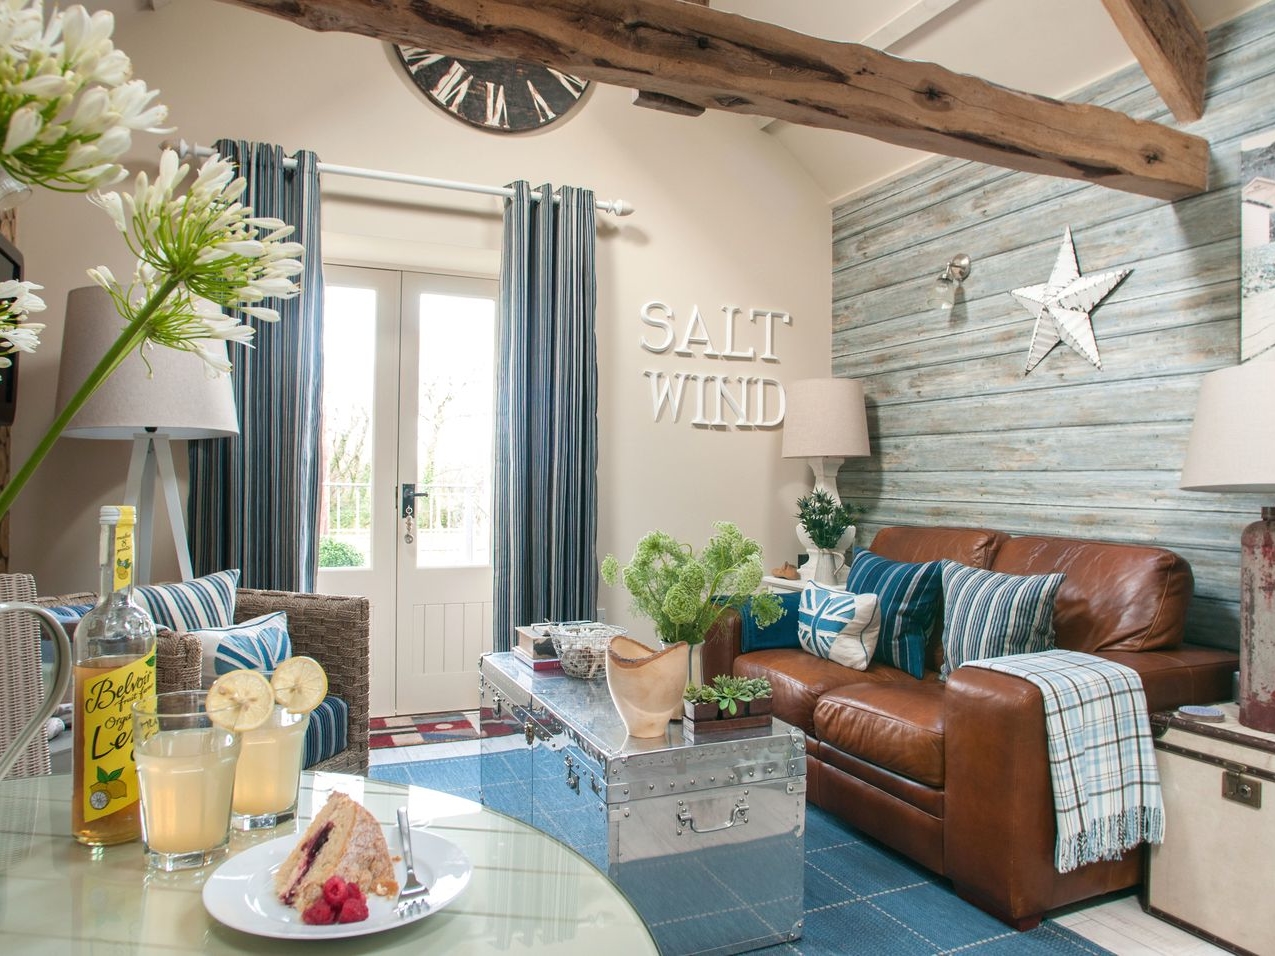 Holiday Cottages in Devon: Saltwind Granary, Clovelly | sykescottages.co.uk 